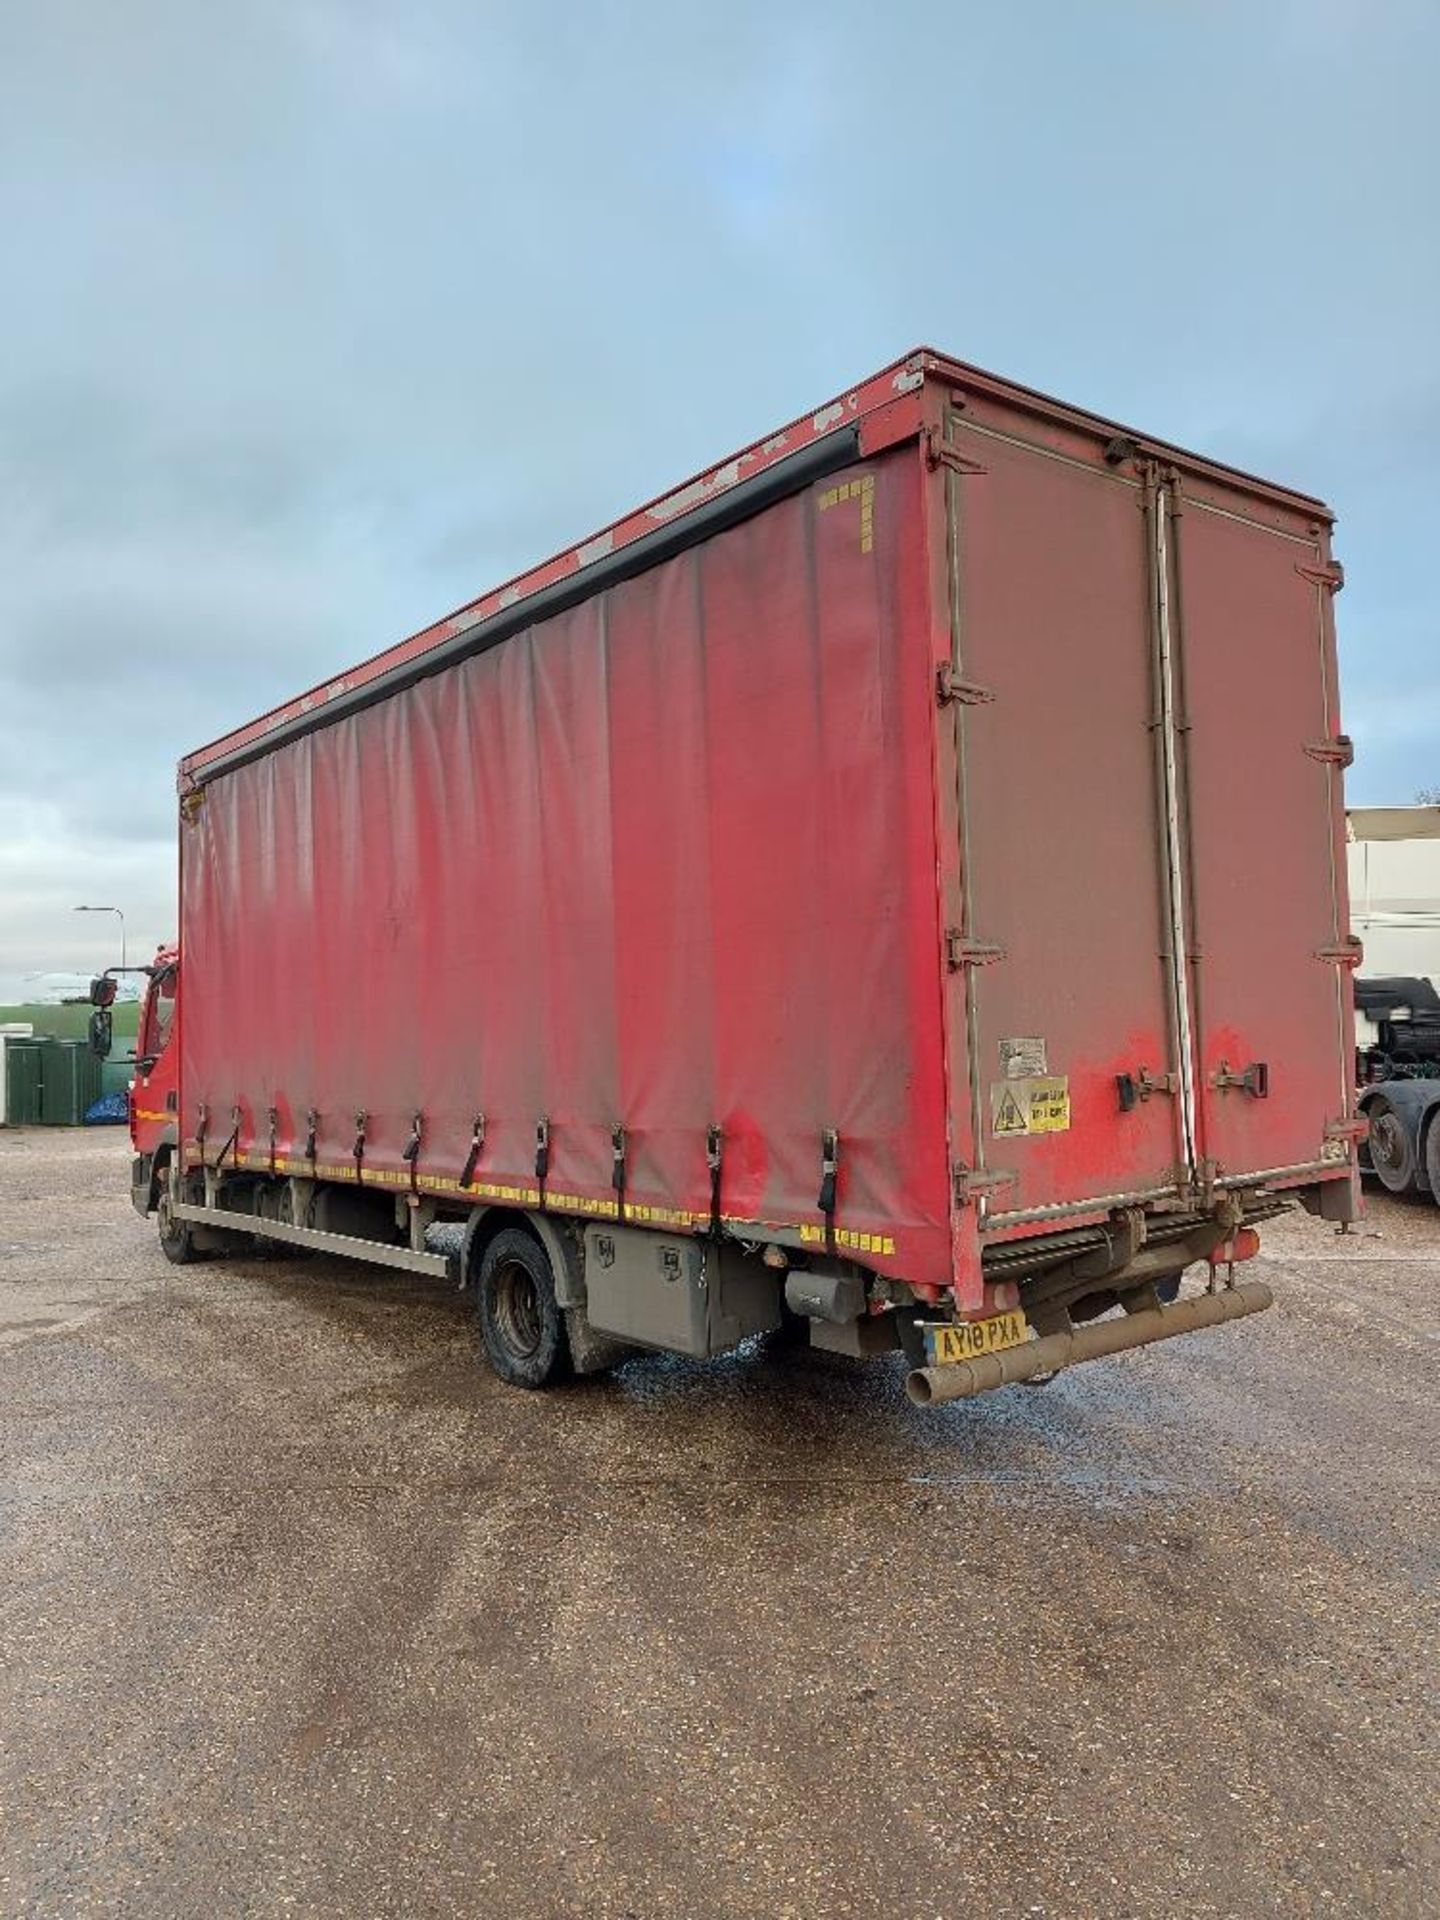 DAF LF 230 4x2 Rigid 12T Curtain Side Lorry with Tail Lift - Image 4 of 10